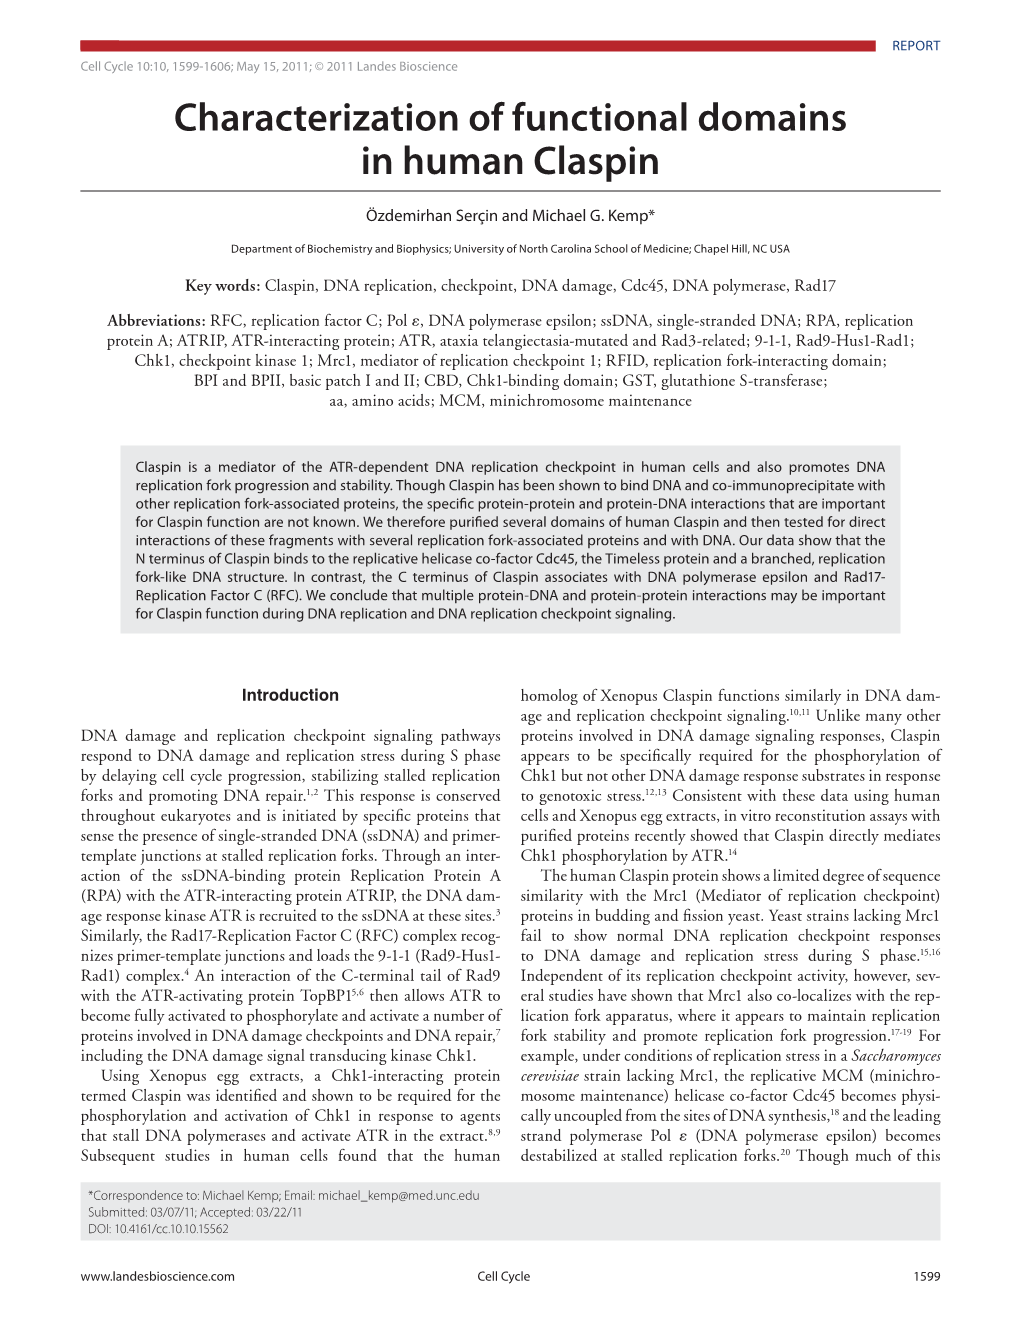 Characterization of Functional Domains in Human Claspin